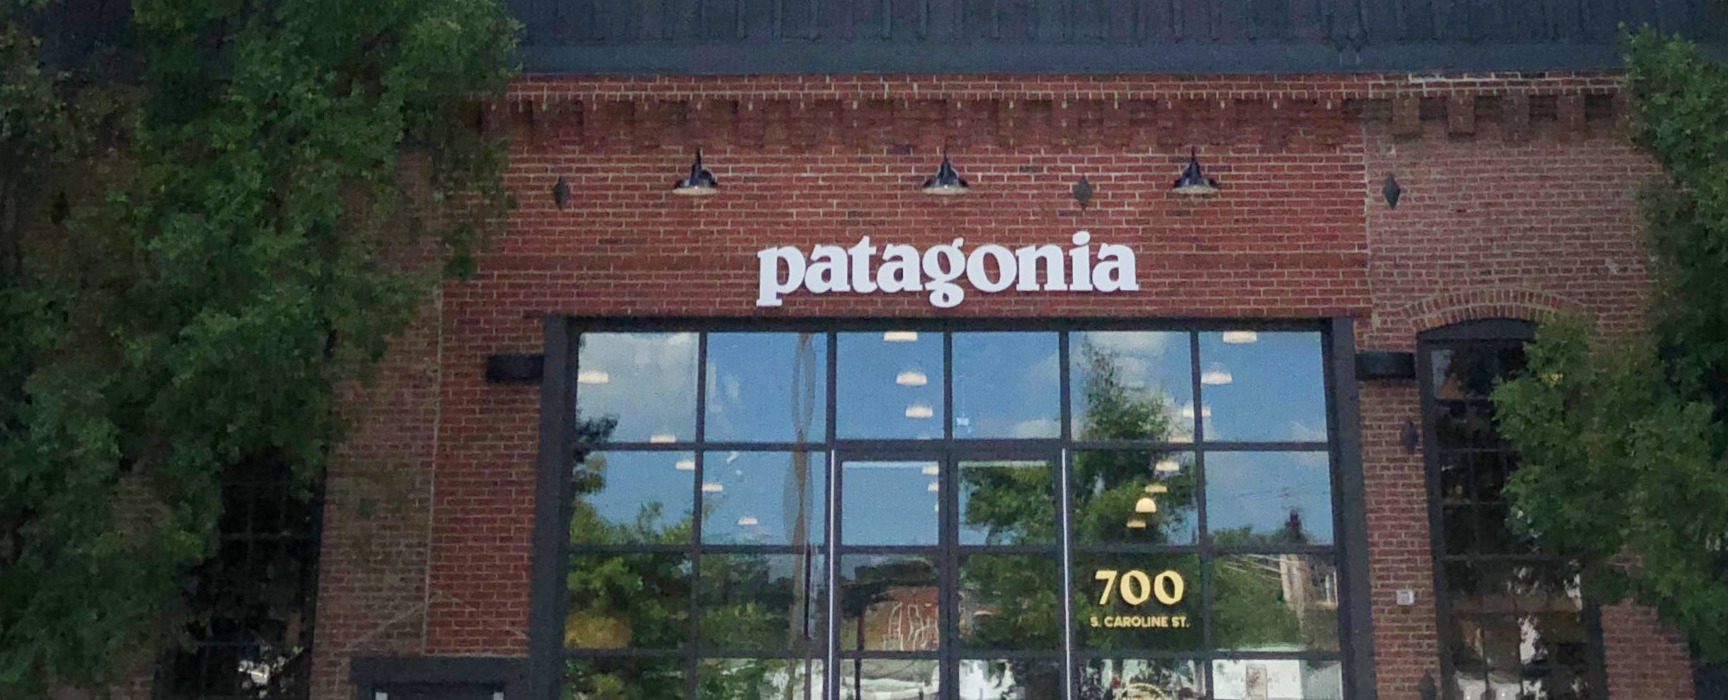 Modern brick exterior of Patagonia, an outdoor clothing and supply retailer in Harbor East